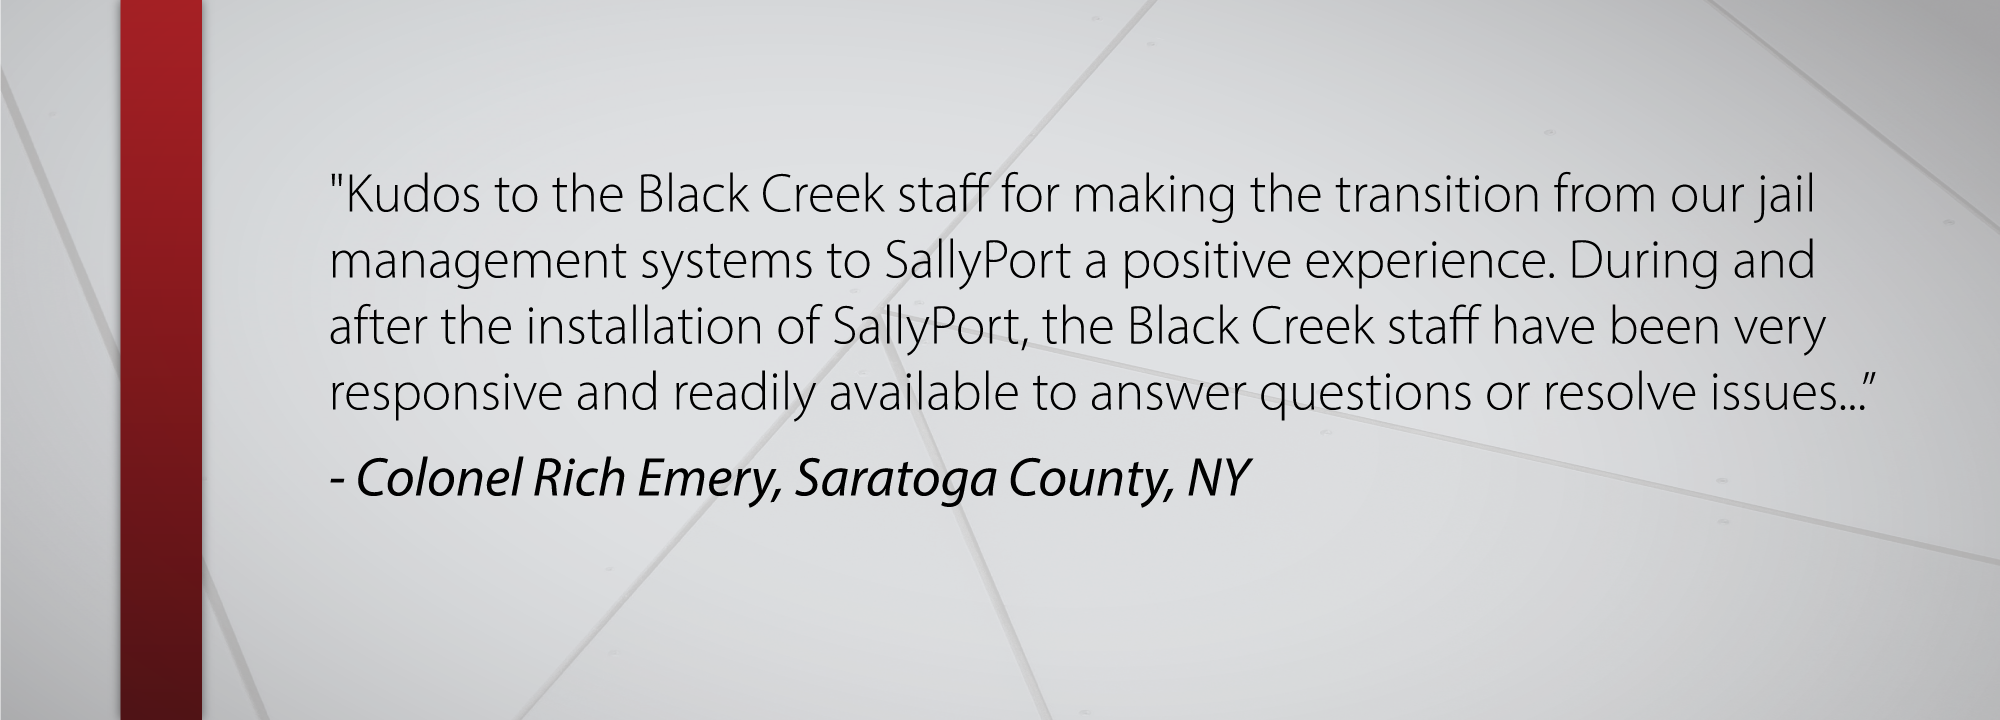 Kudos to the Black Creek staff for making the transition from our jail management systems to SallyPort a positive experience. During and after the installation of SallyPort, the Black Creek staff have been very responsive and readily available to answer questions or resolve issues... - Colonel Rich Emery, Saratoga, NY